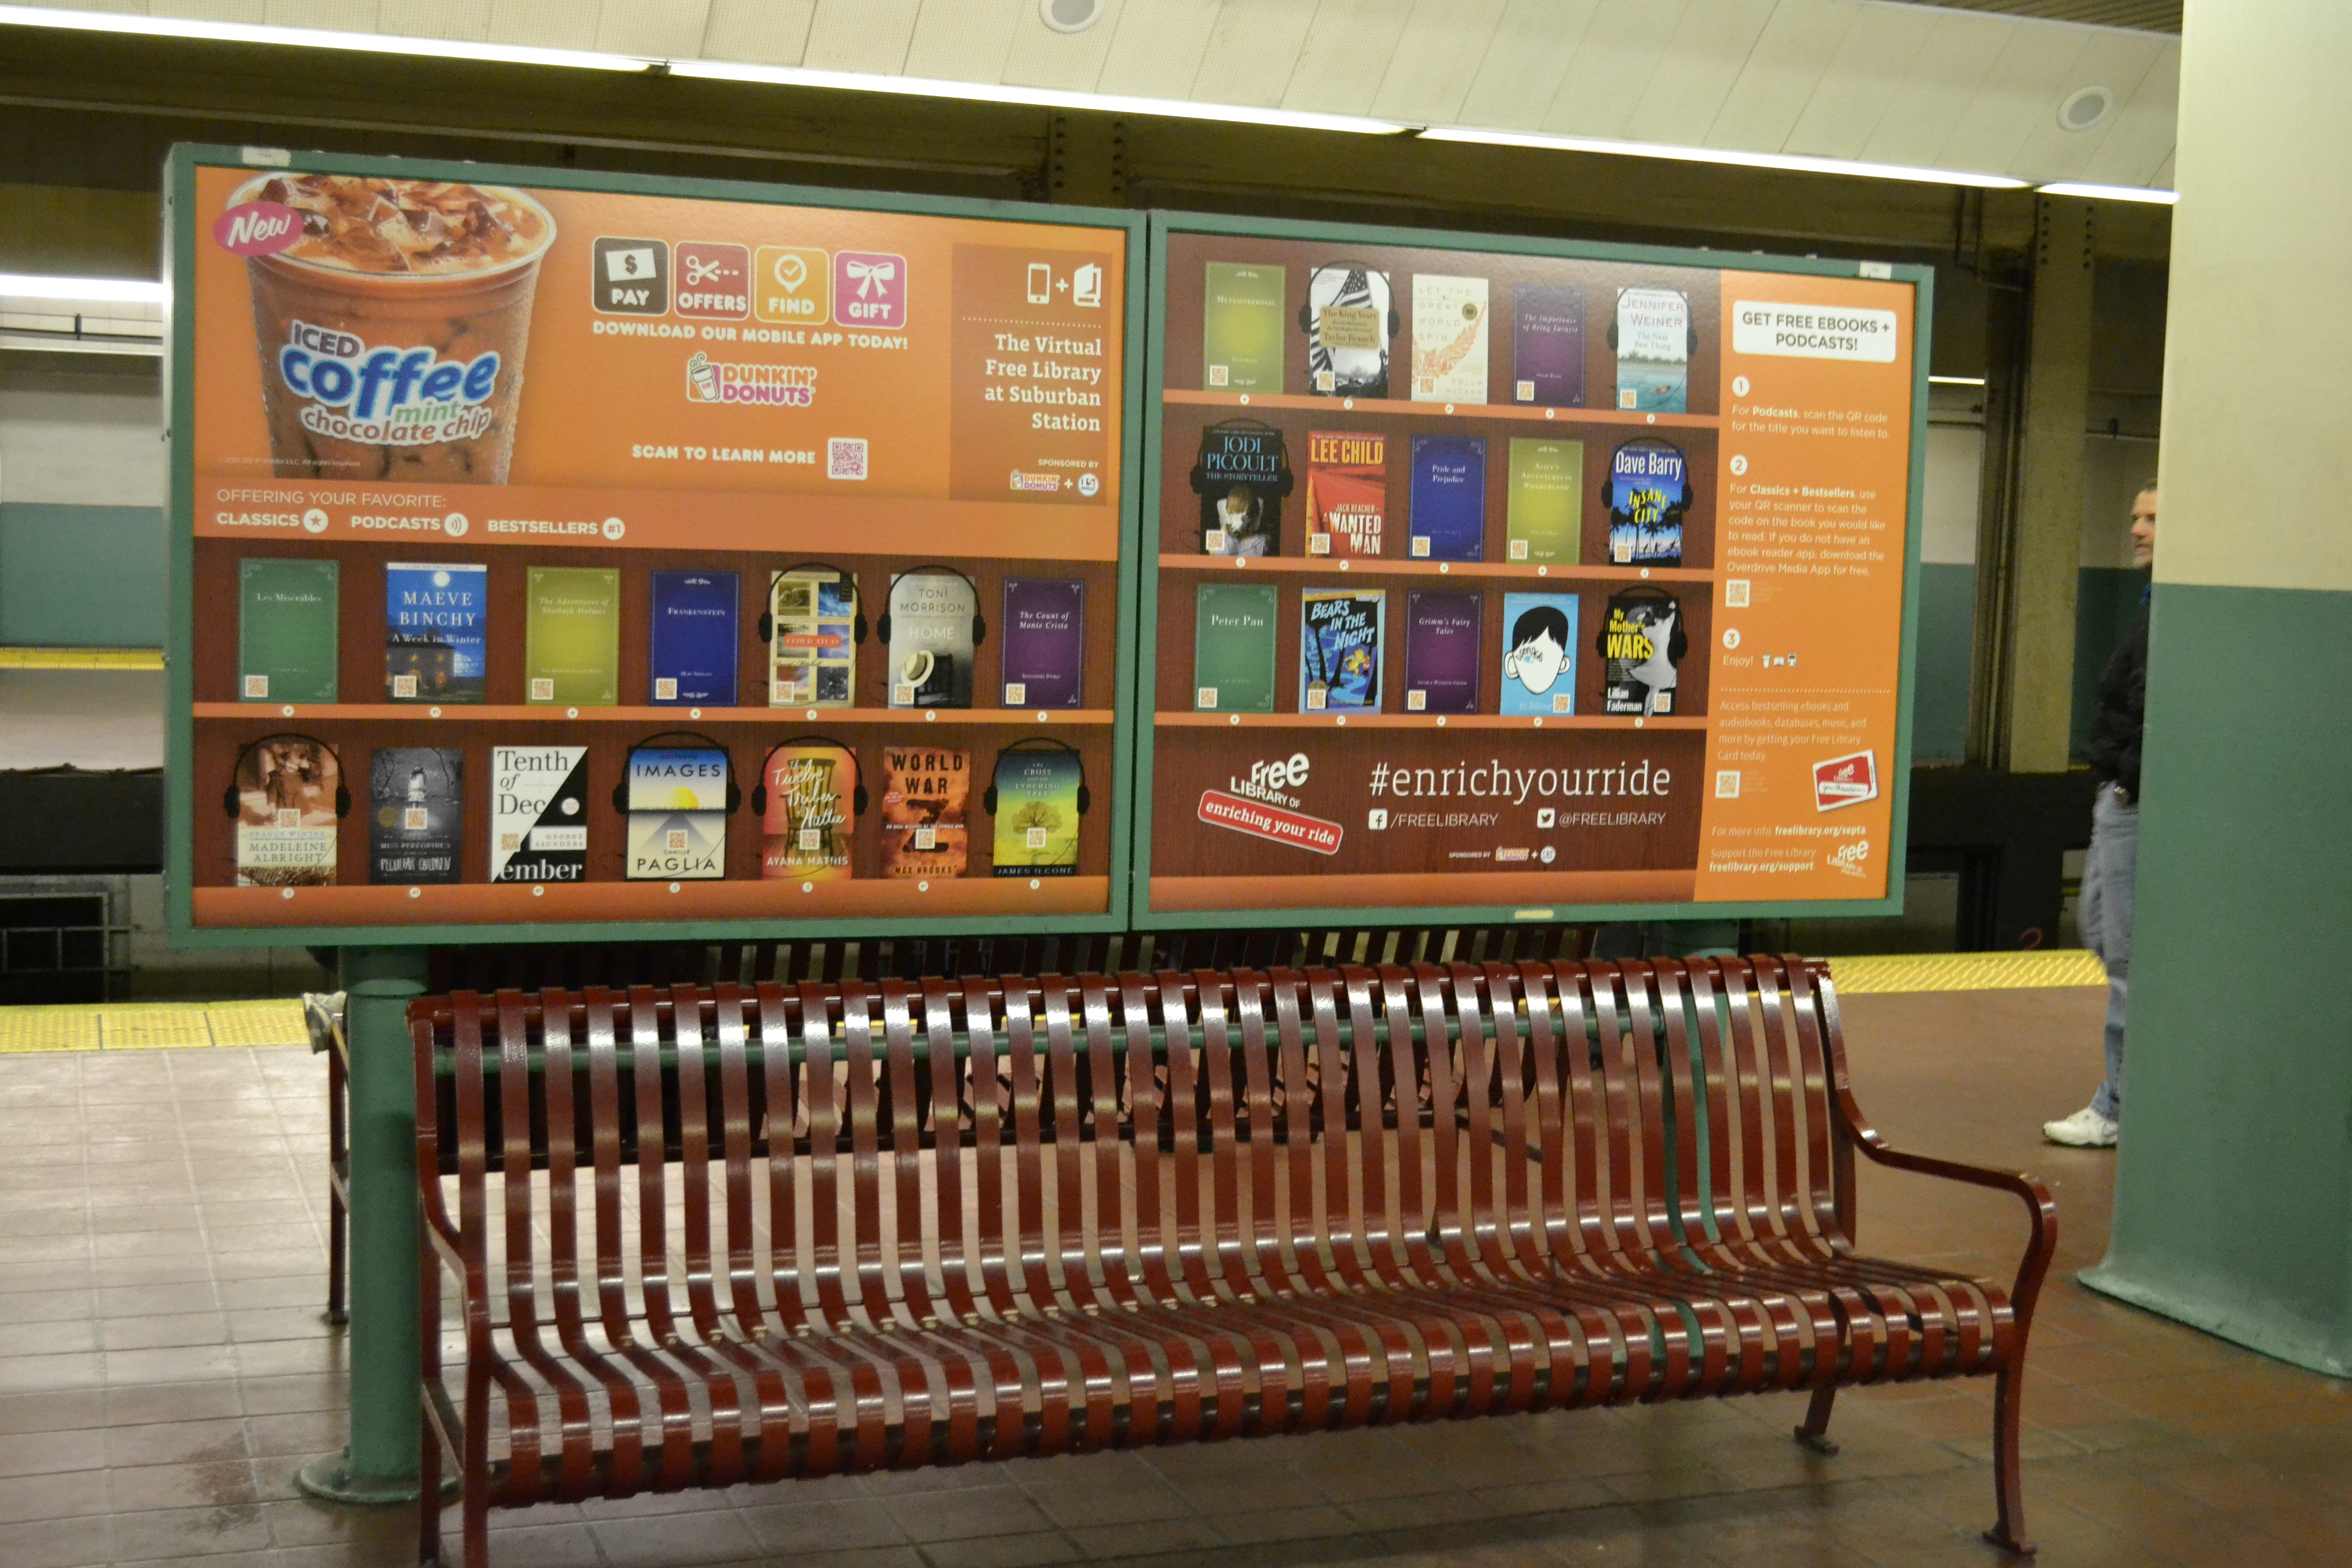 Seventy-six ad boards have been converted into bookshelves from which riders can choose among roughly 50 free titles